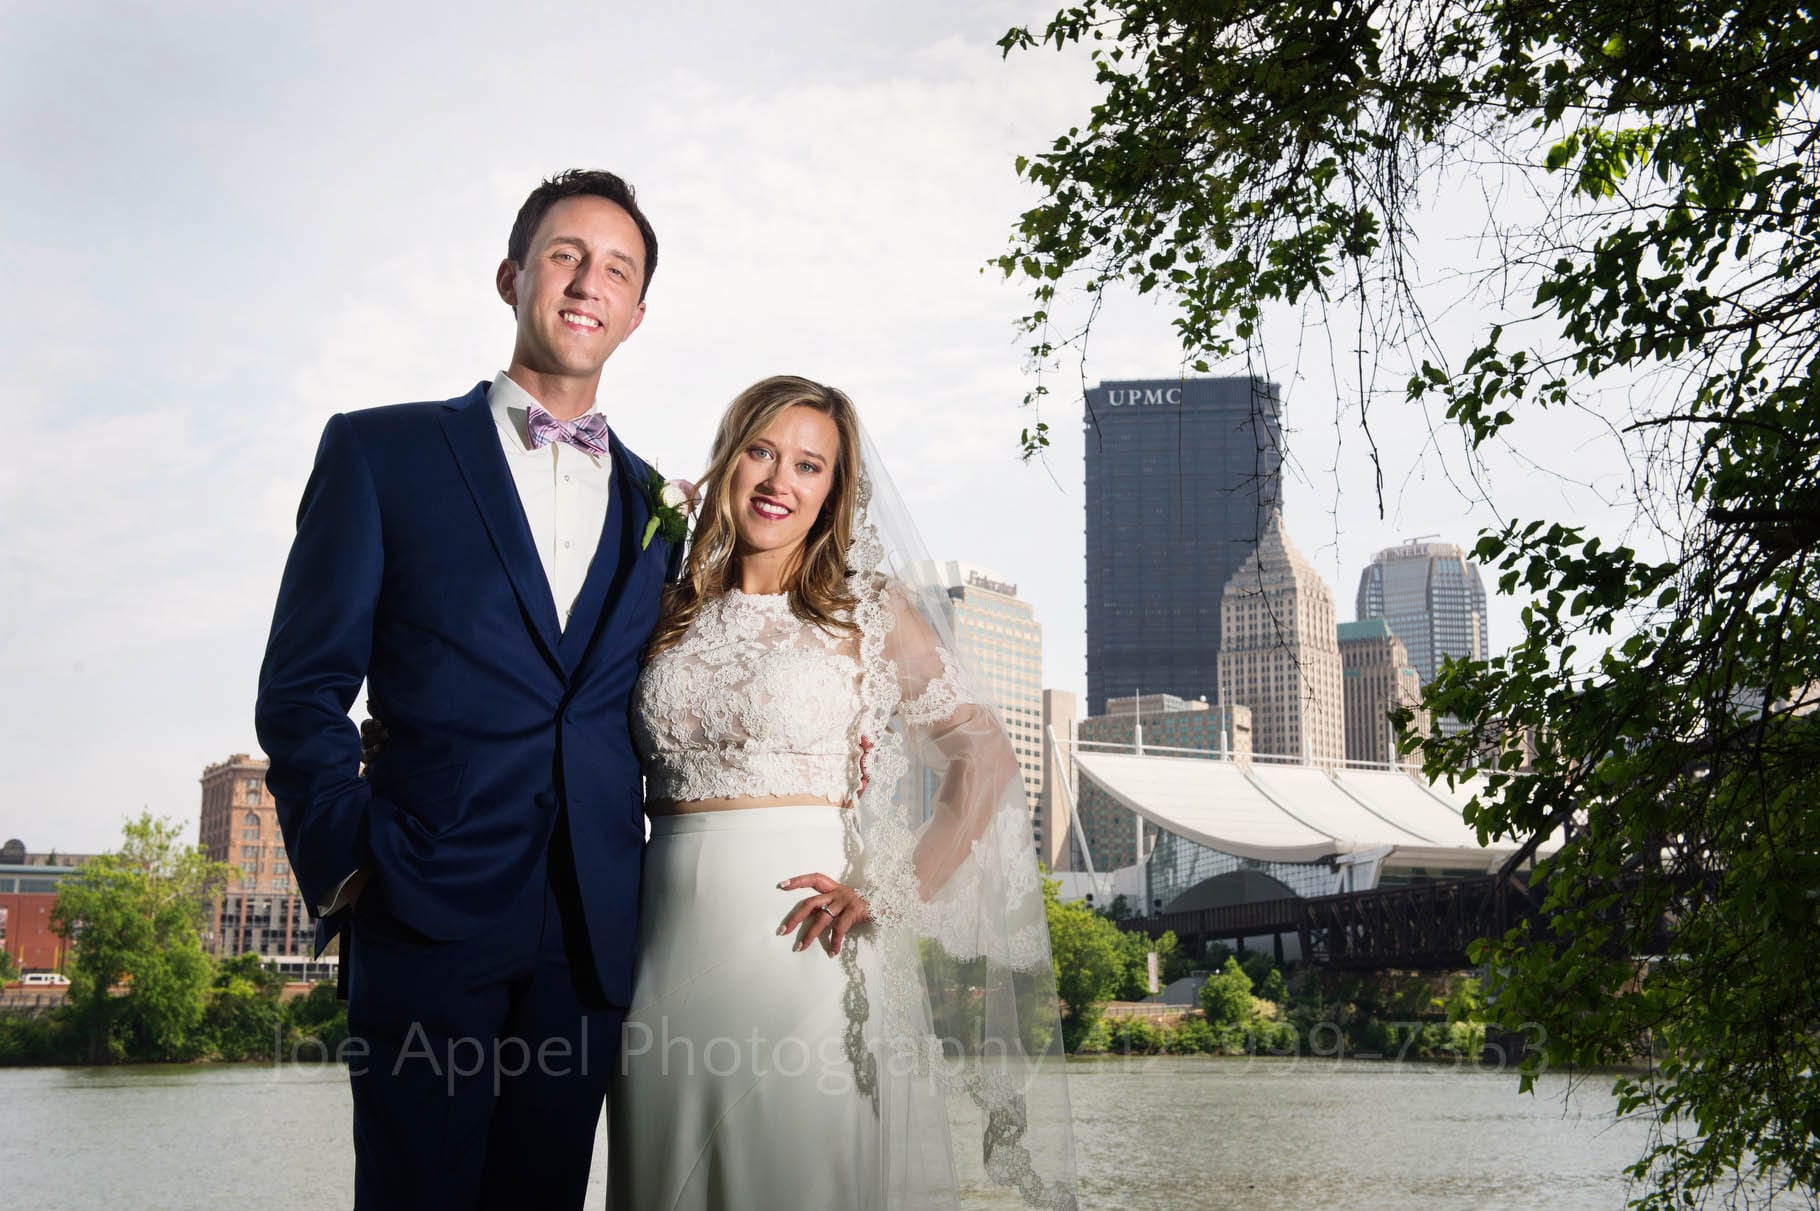 Portrait of a bride and groom as they stand together beneath a tree with the Allegheny River and a view of downtown Pittsburgh behind them.